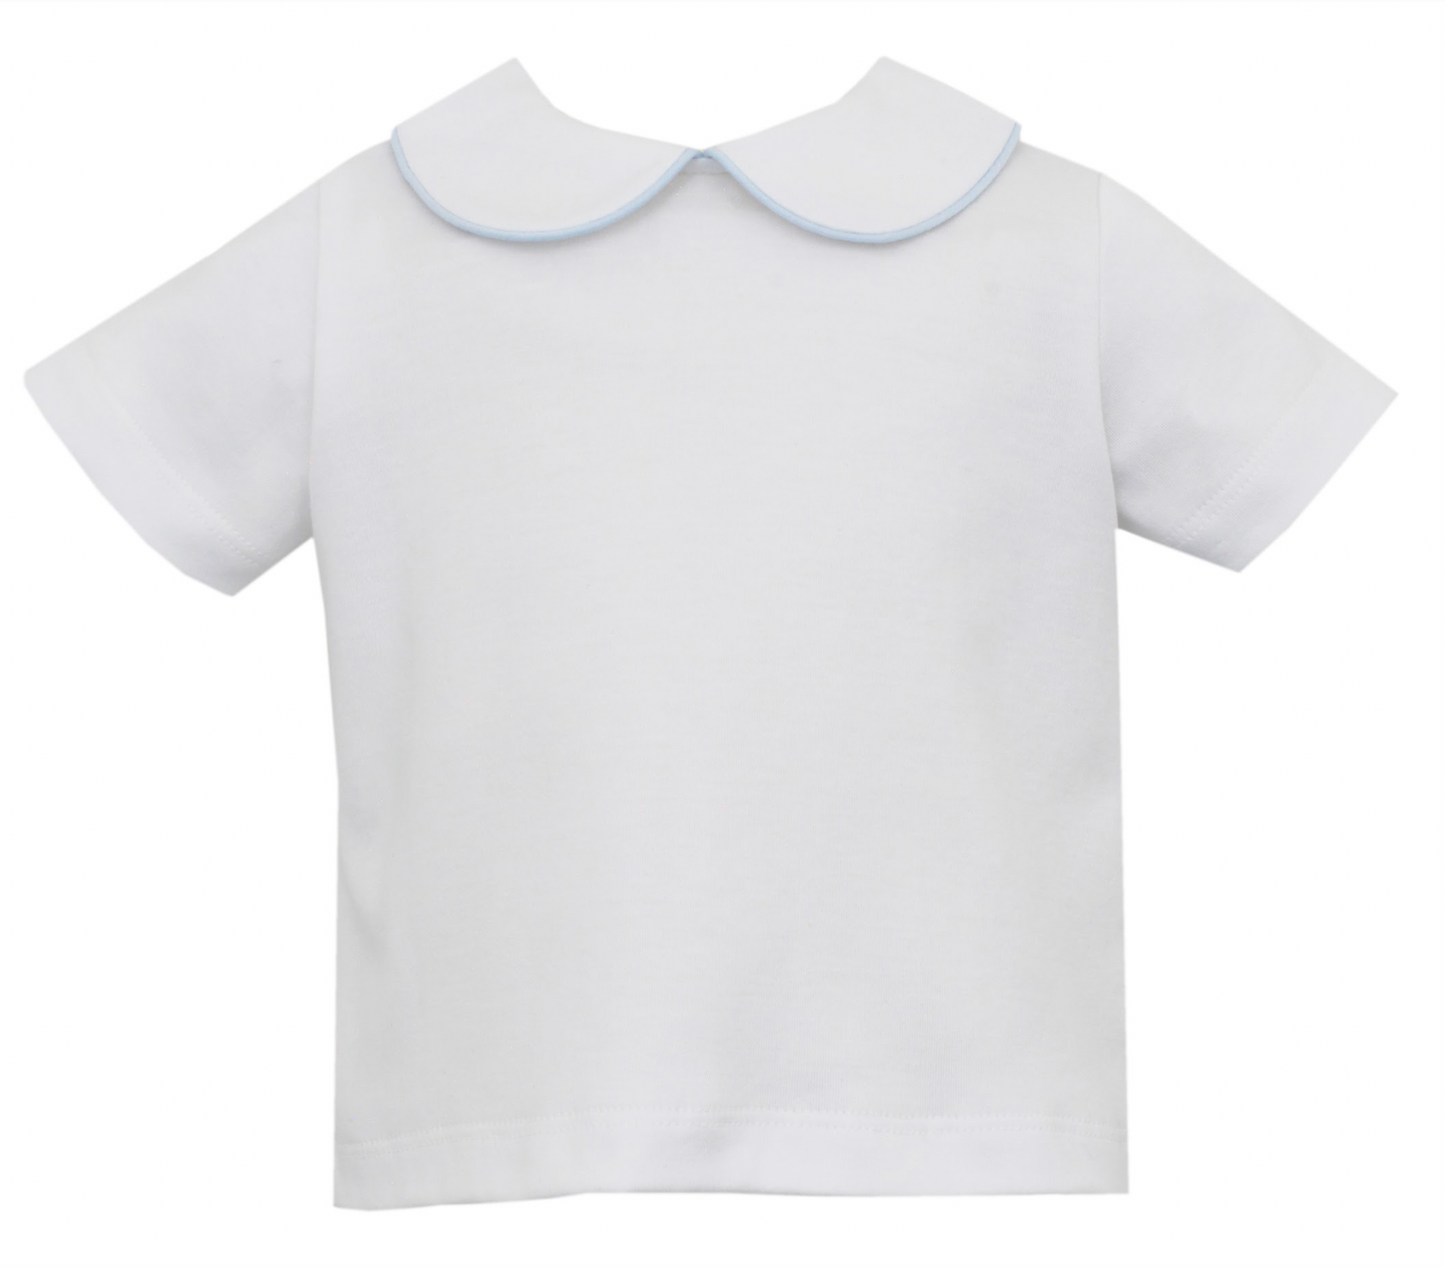 Boy's Short Sleeve Knit Collared Shirt, White with Blue Piping